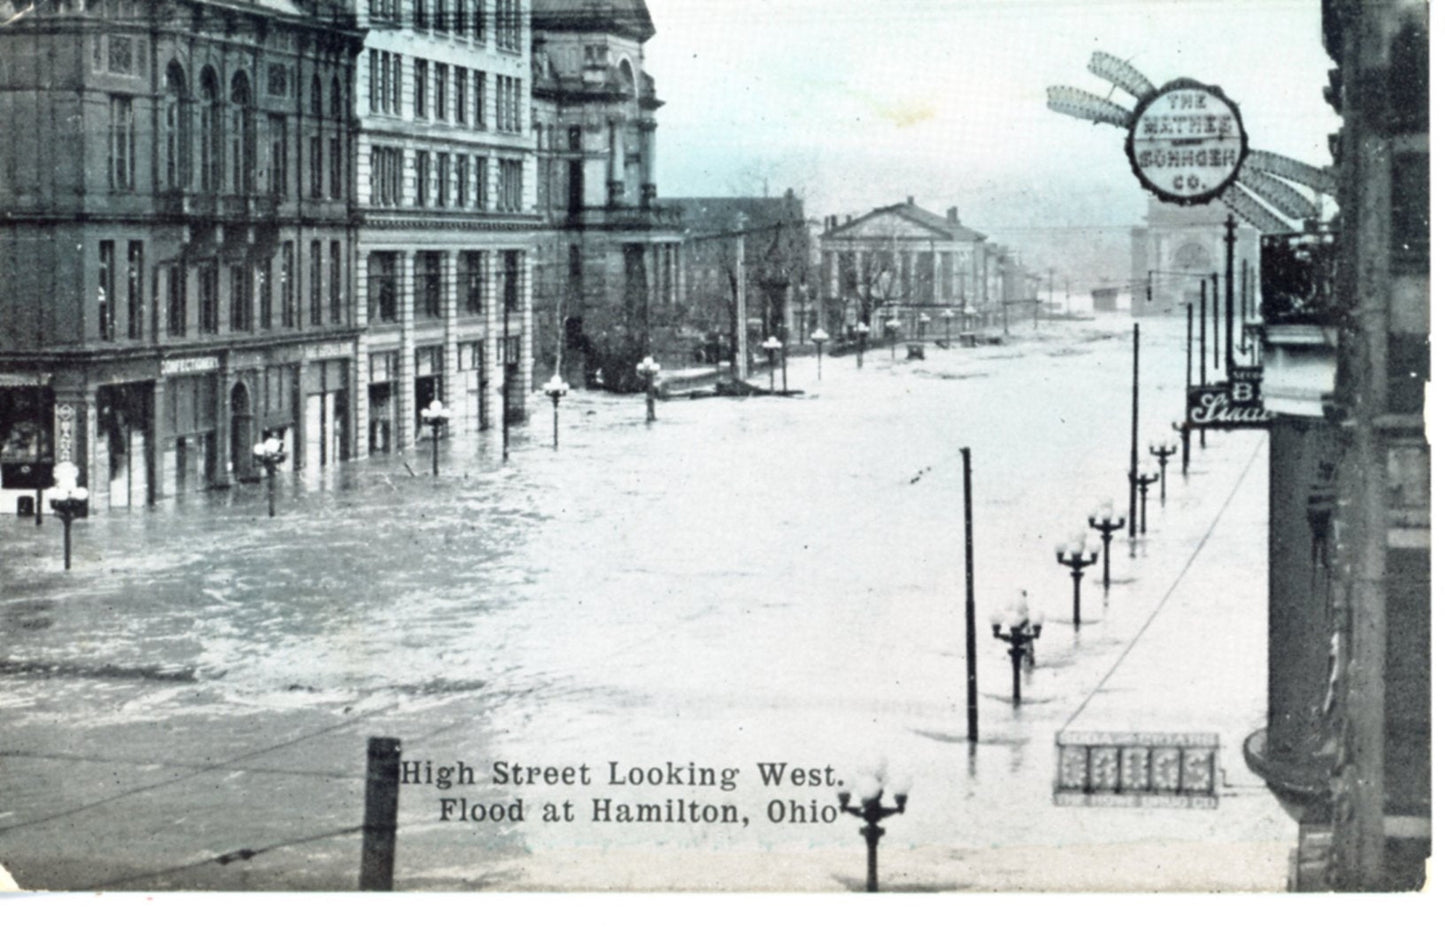 Flood Waters "High Street Looking West" Great Flood Disaster of 1913 HAMILTON OHIO Antique Real Photo Postcard